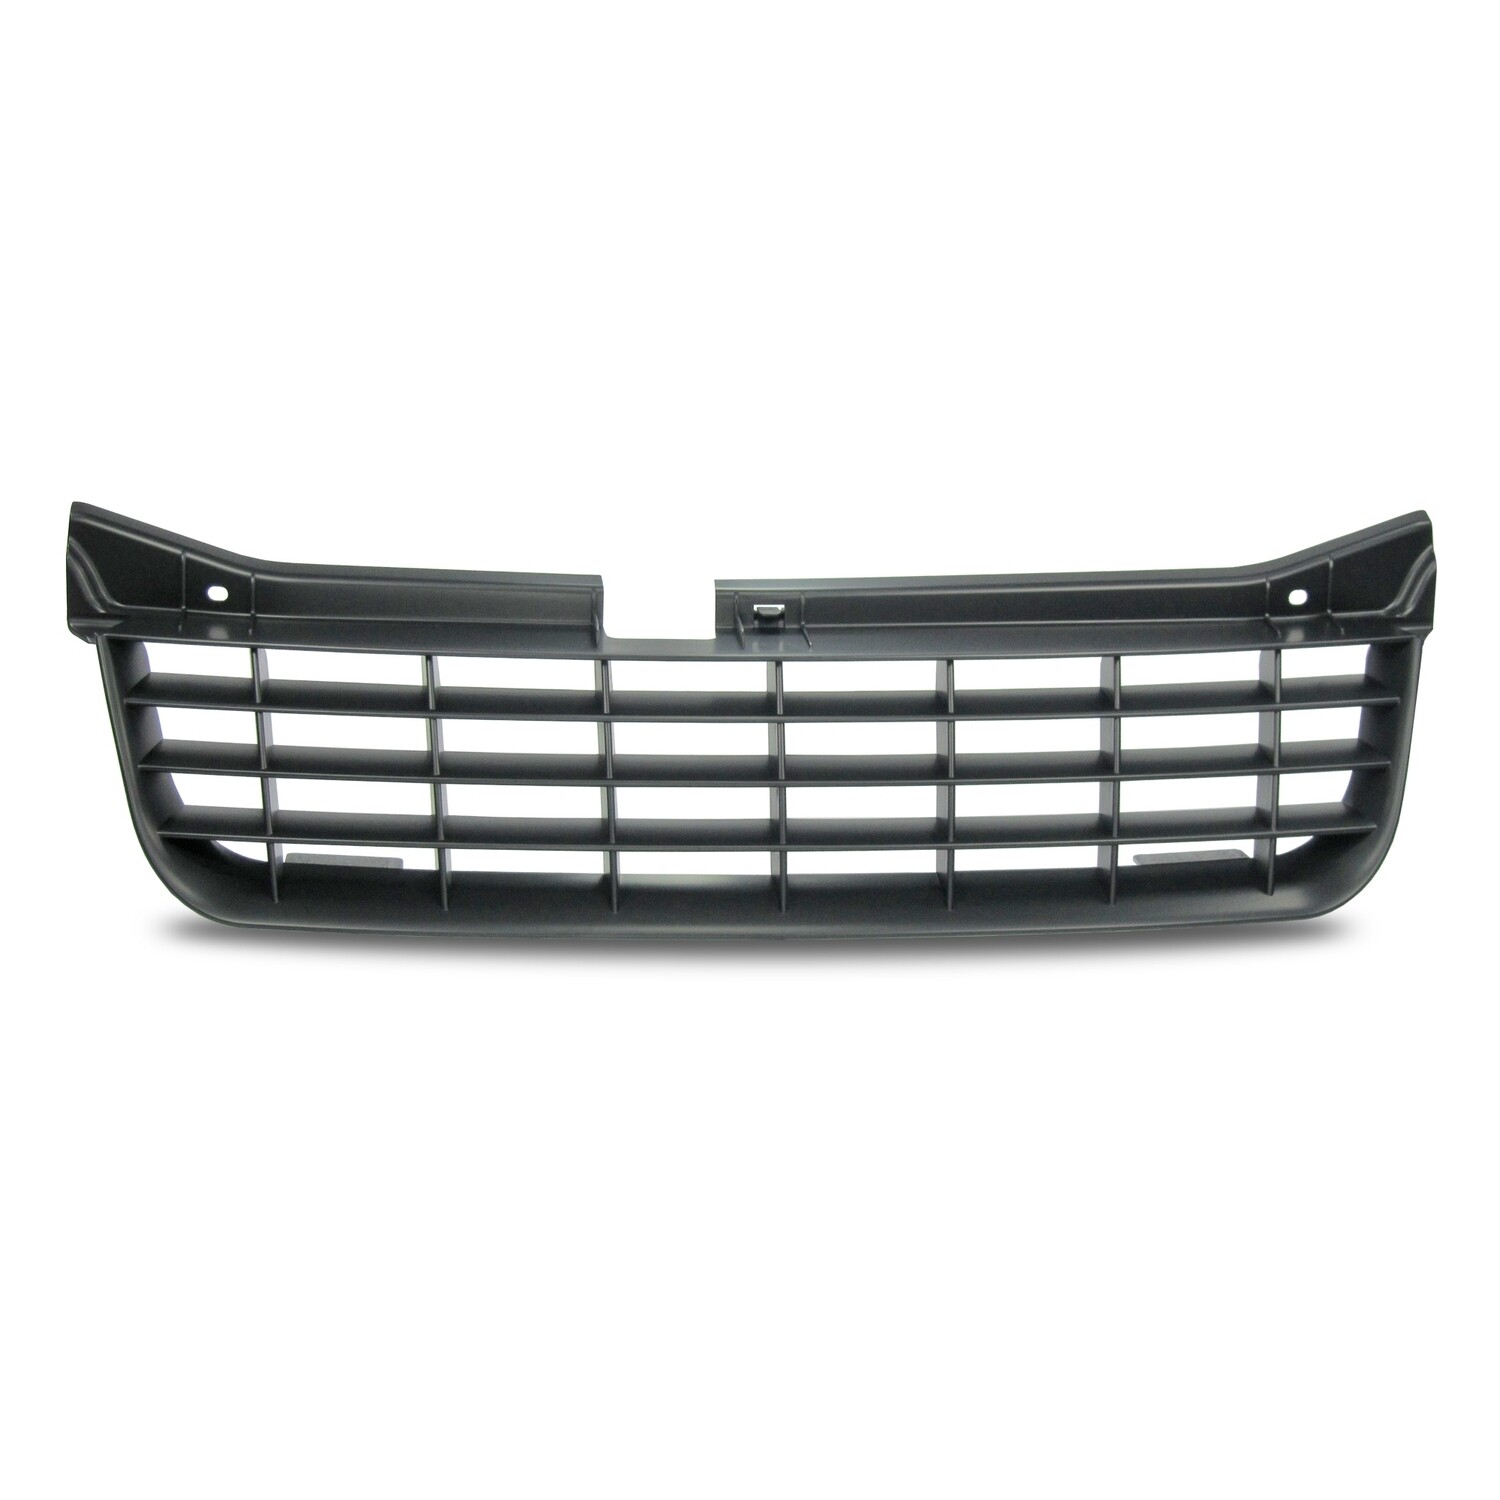 Calandre / Grille Sport Look pour Opel Omega B 1994 - 1999